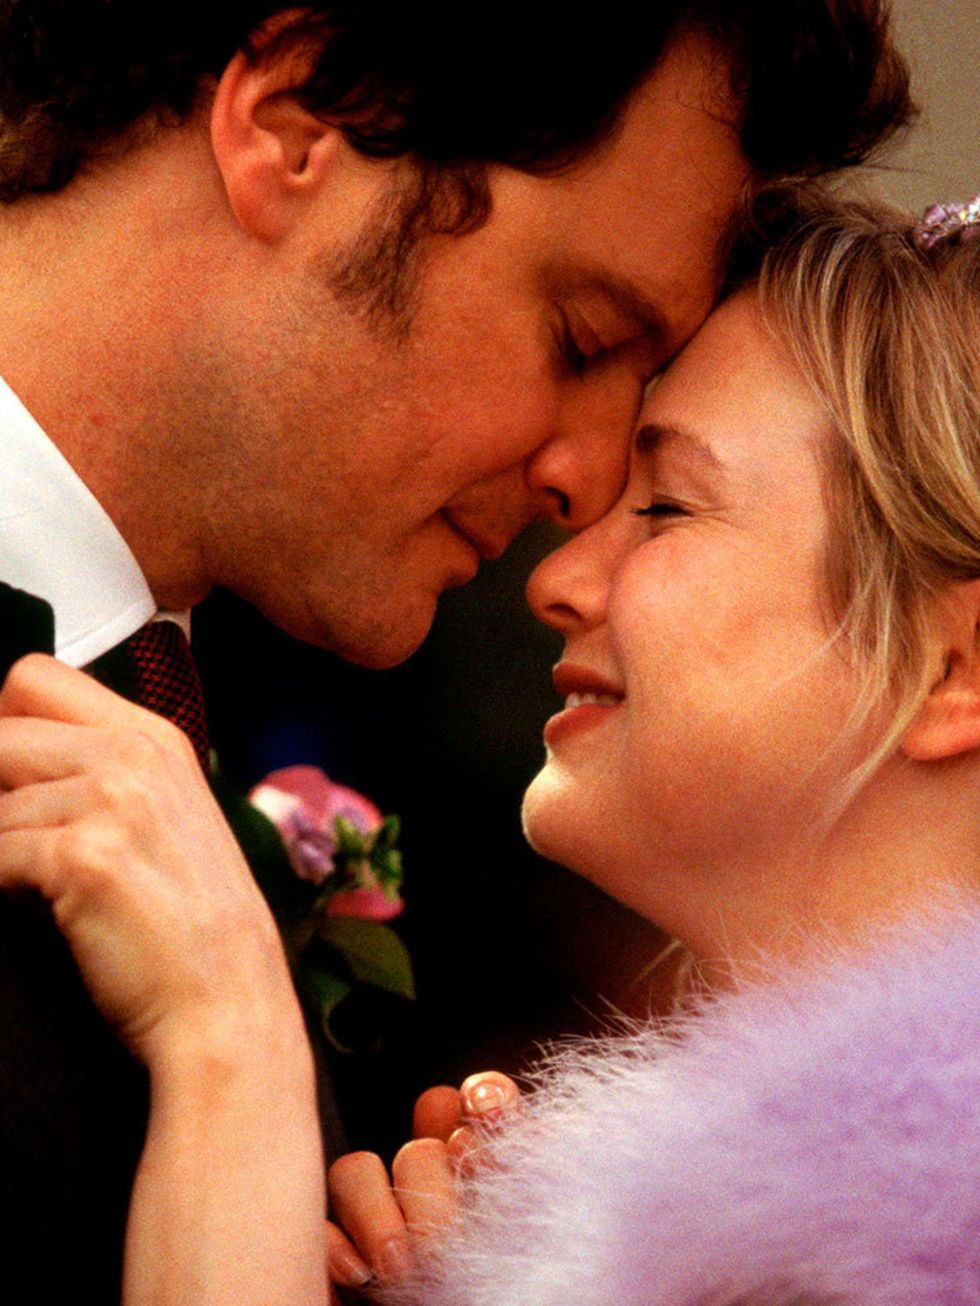 Bridget Jones's Diary cast: Then and now  Renée Zellweger, Colin Firth,  Hugh Grant and more